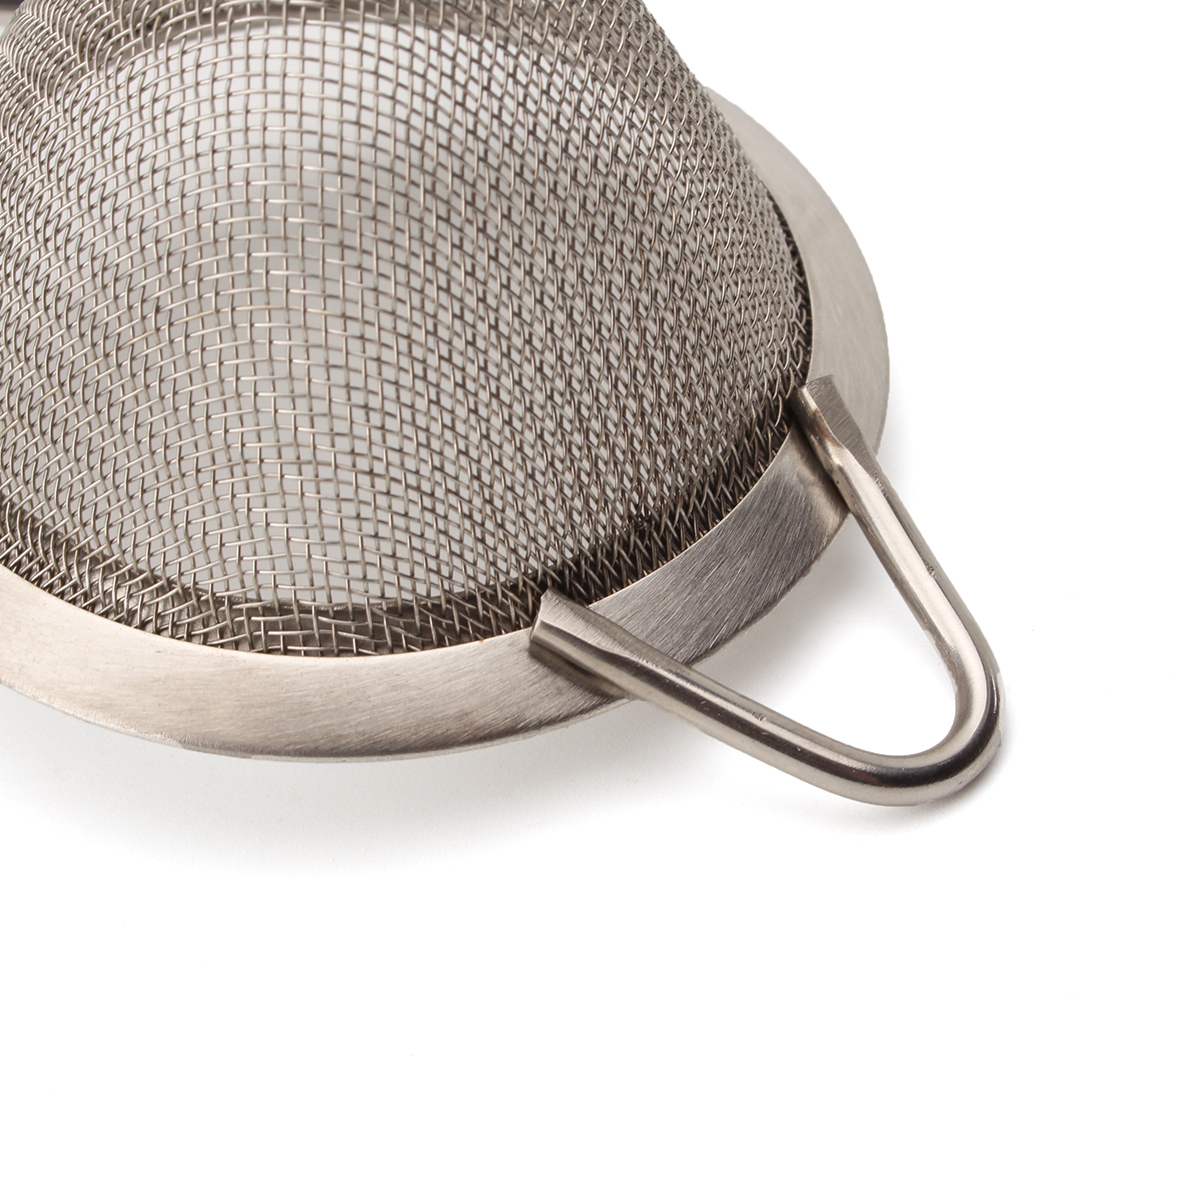 Stainless-Steel-Fine-Mesh-Tea-Cocktail-Strainer-Traditional-Colander-Sifter-Sieve-Filter-Tool-1350767